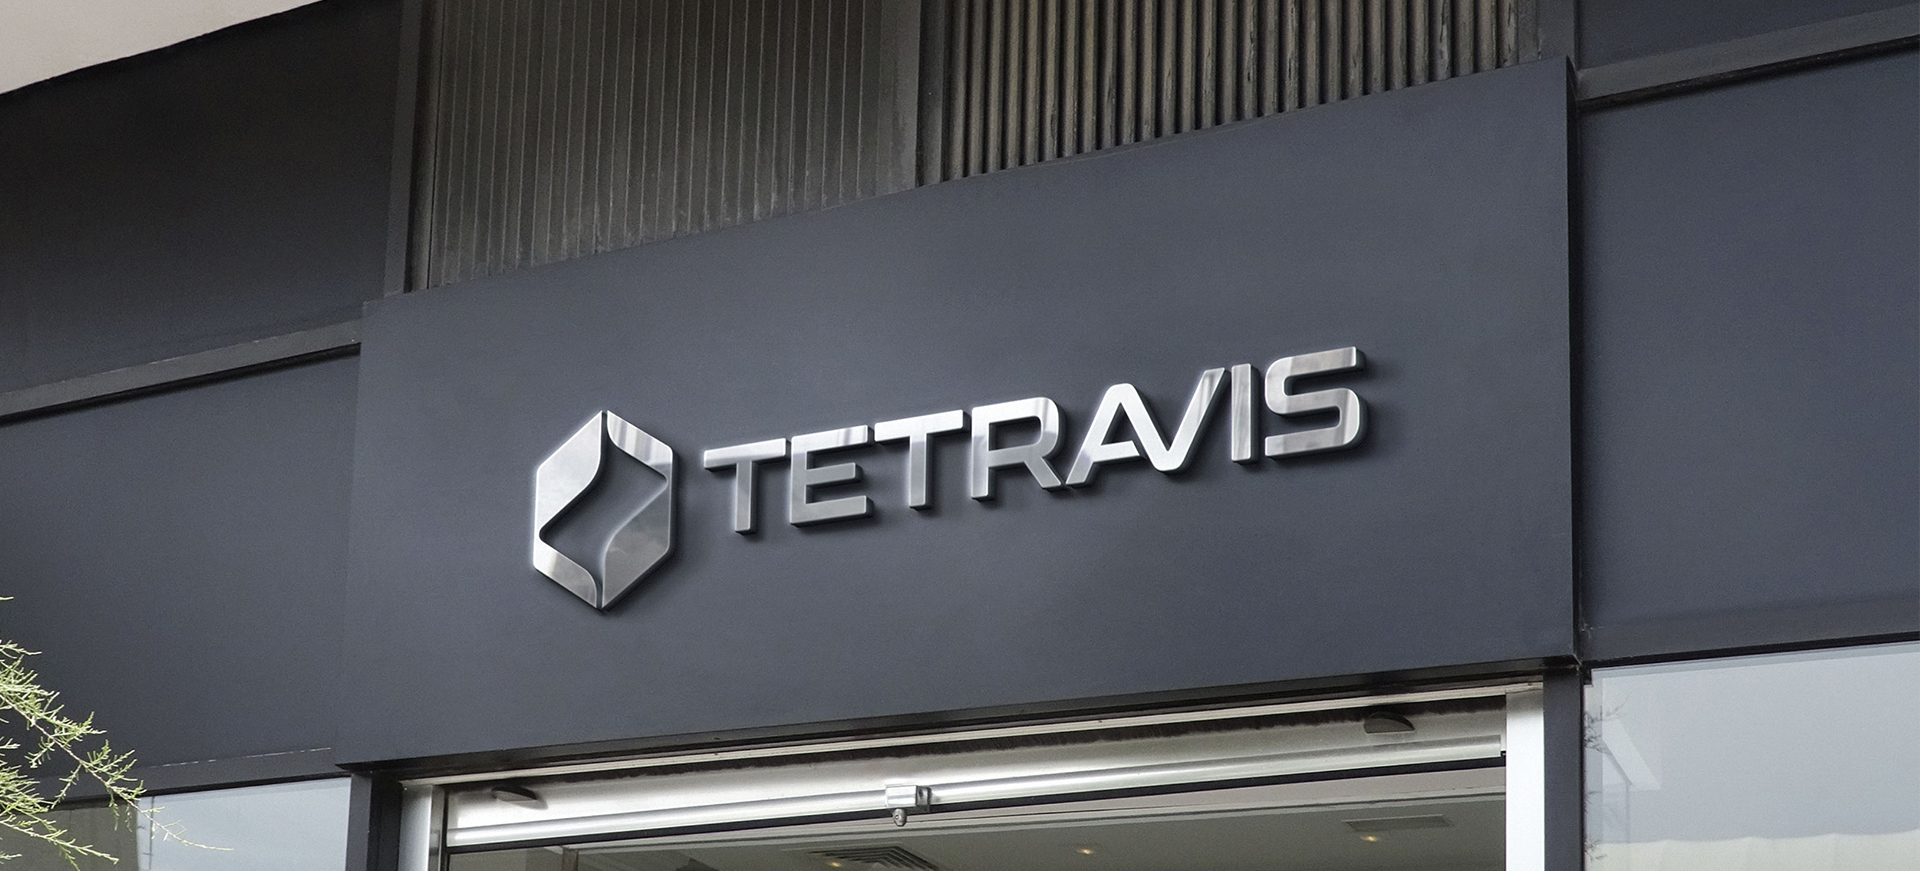 TetraVis is the first in-house developed software product.